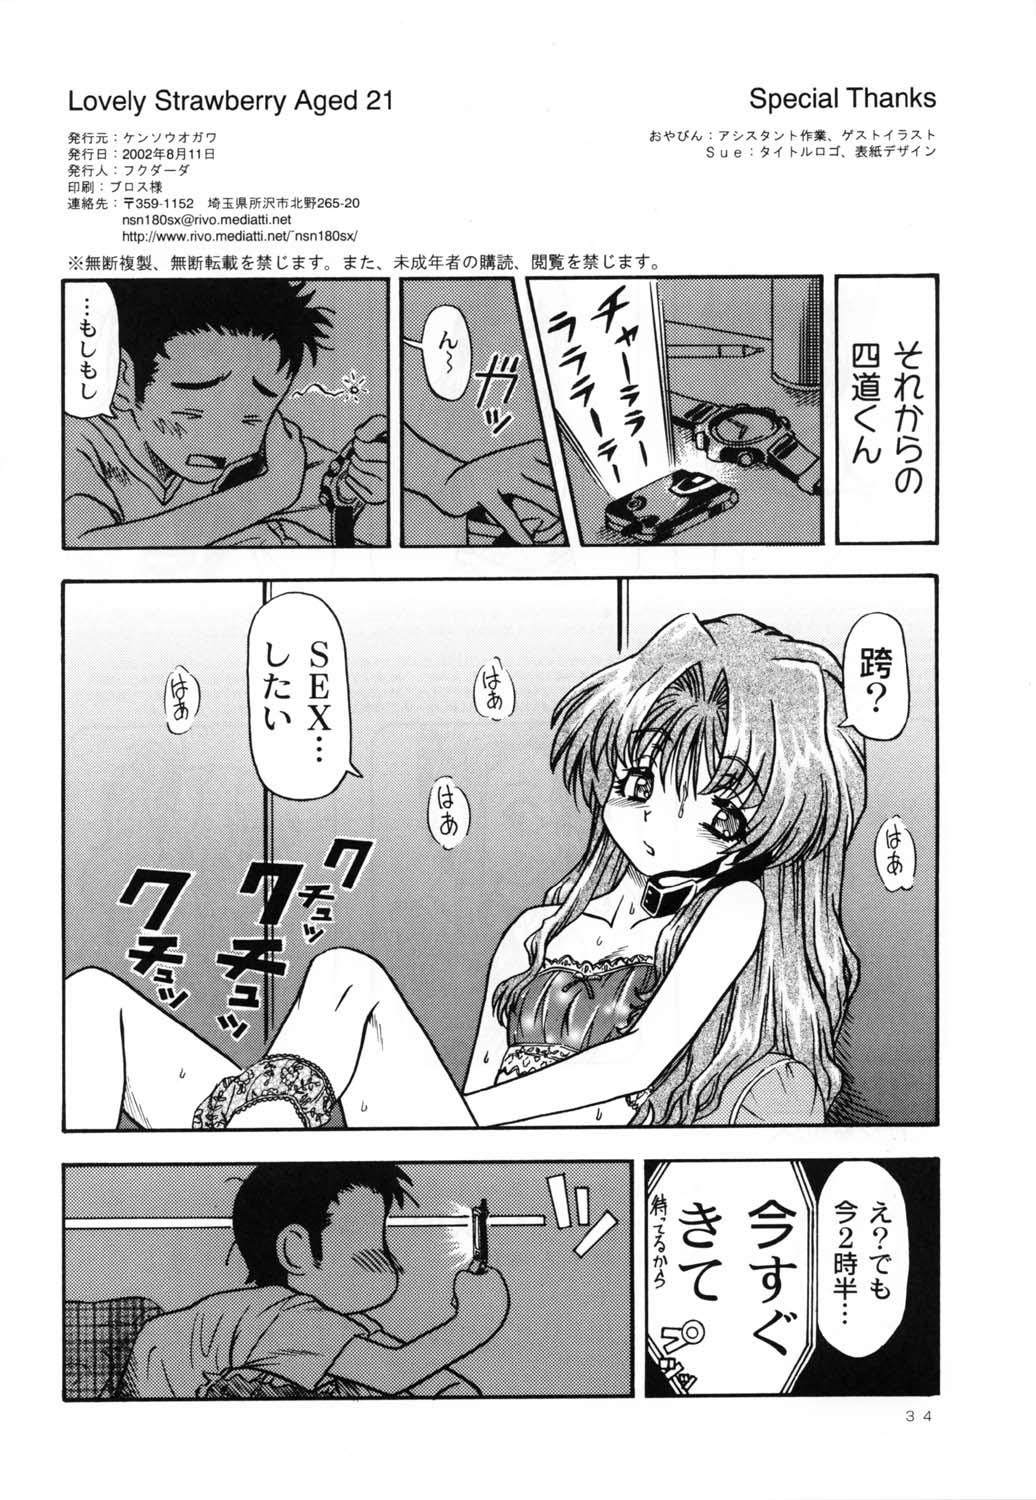 Interacial Lovely Strawberry Aged 21 Extra Edition - Onegai teacher Nudist - Page 50